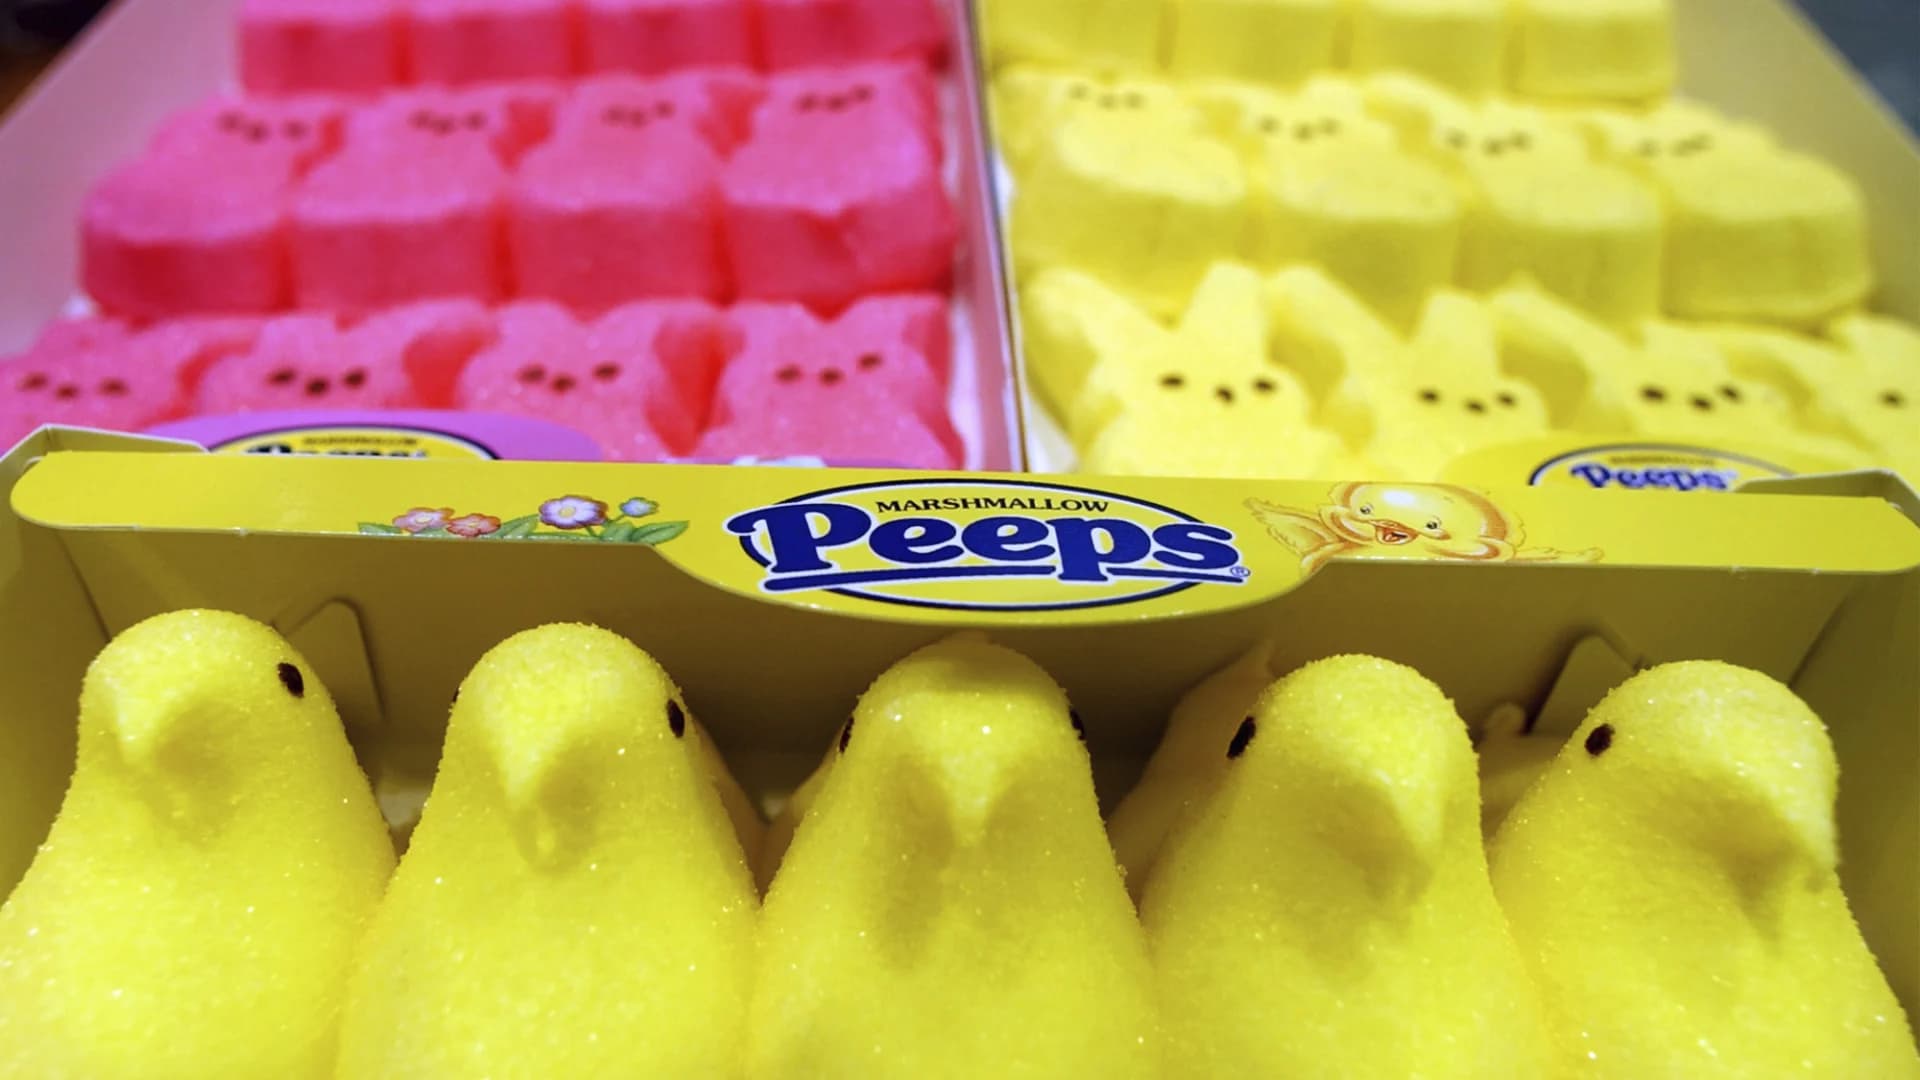 New Jersey ranks #1 in Peeps purchases